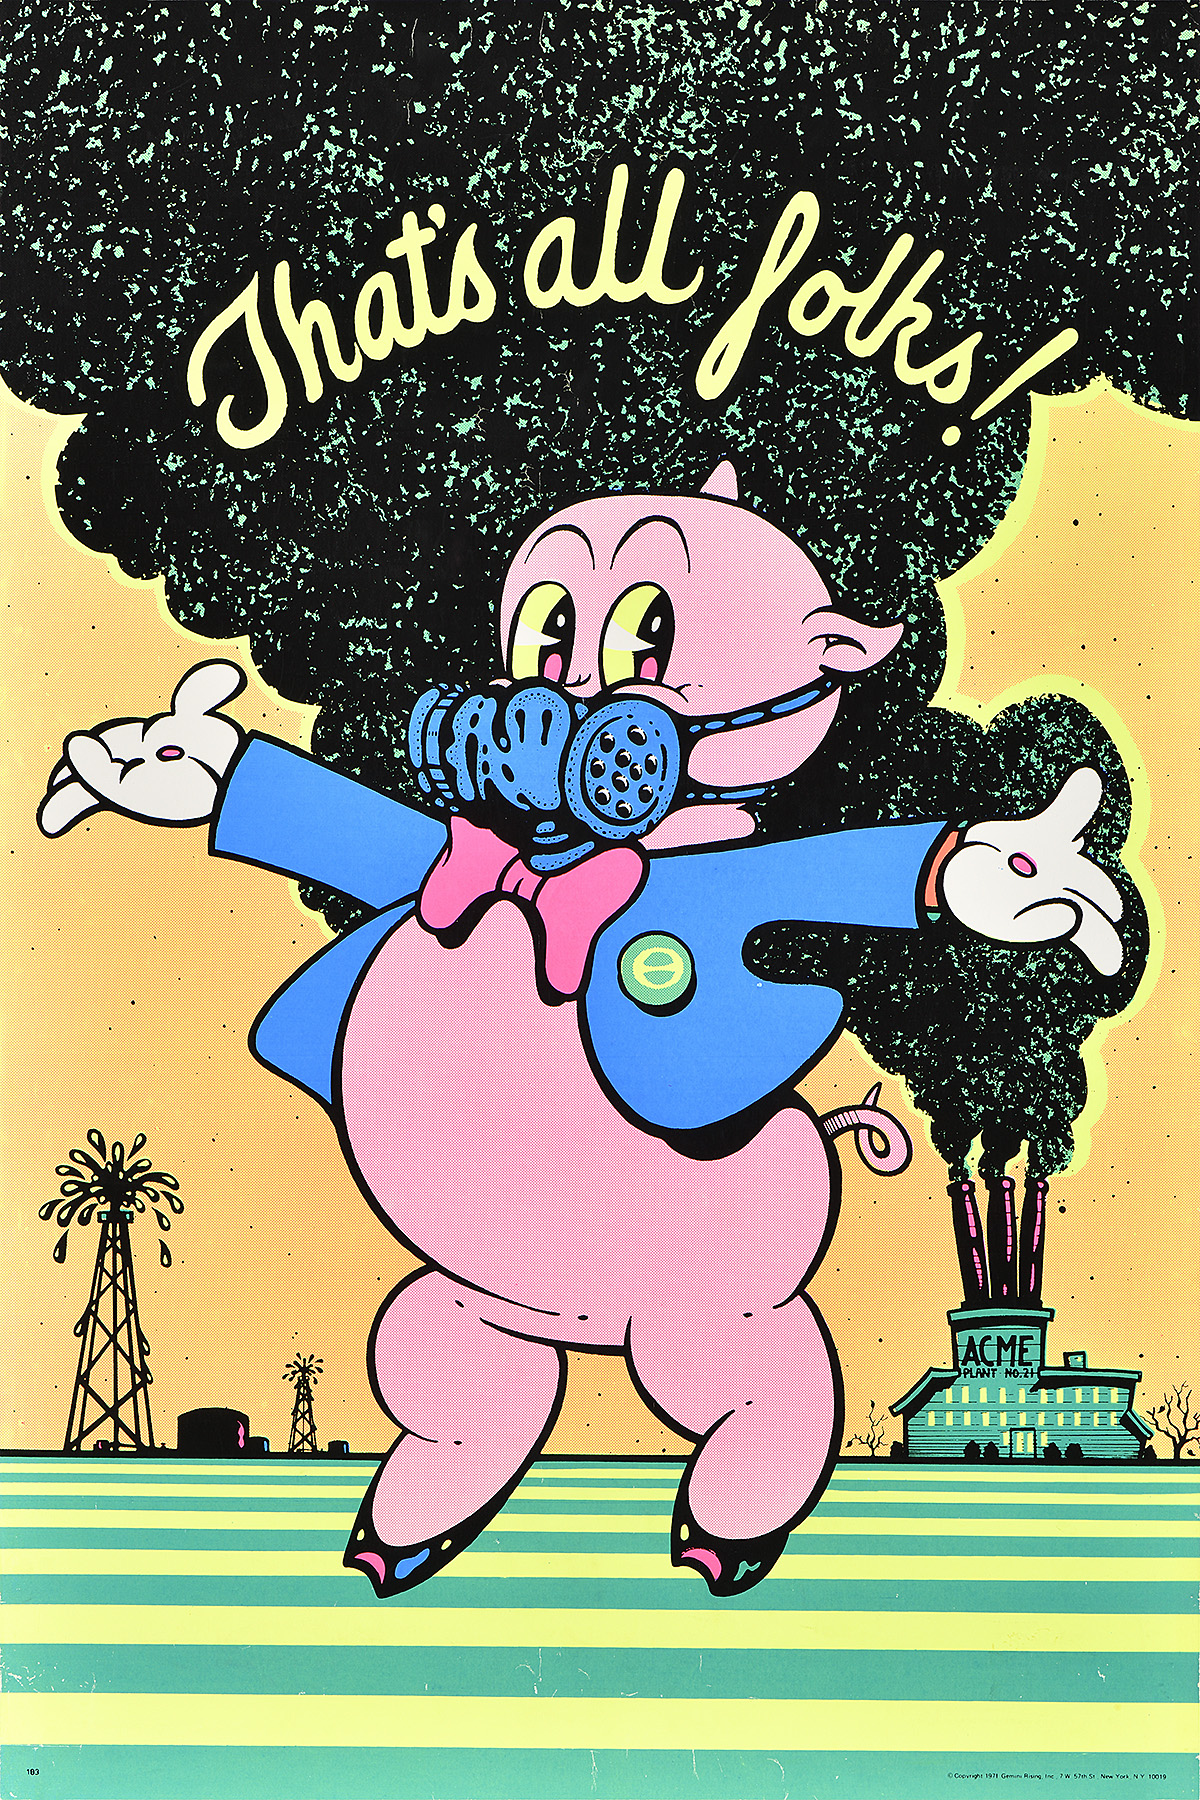 A poster of porky pig wearing a gas mask with cursive text reading 